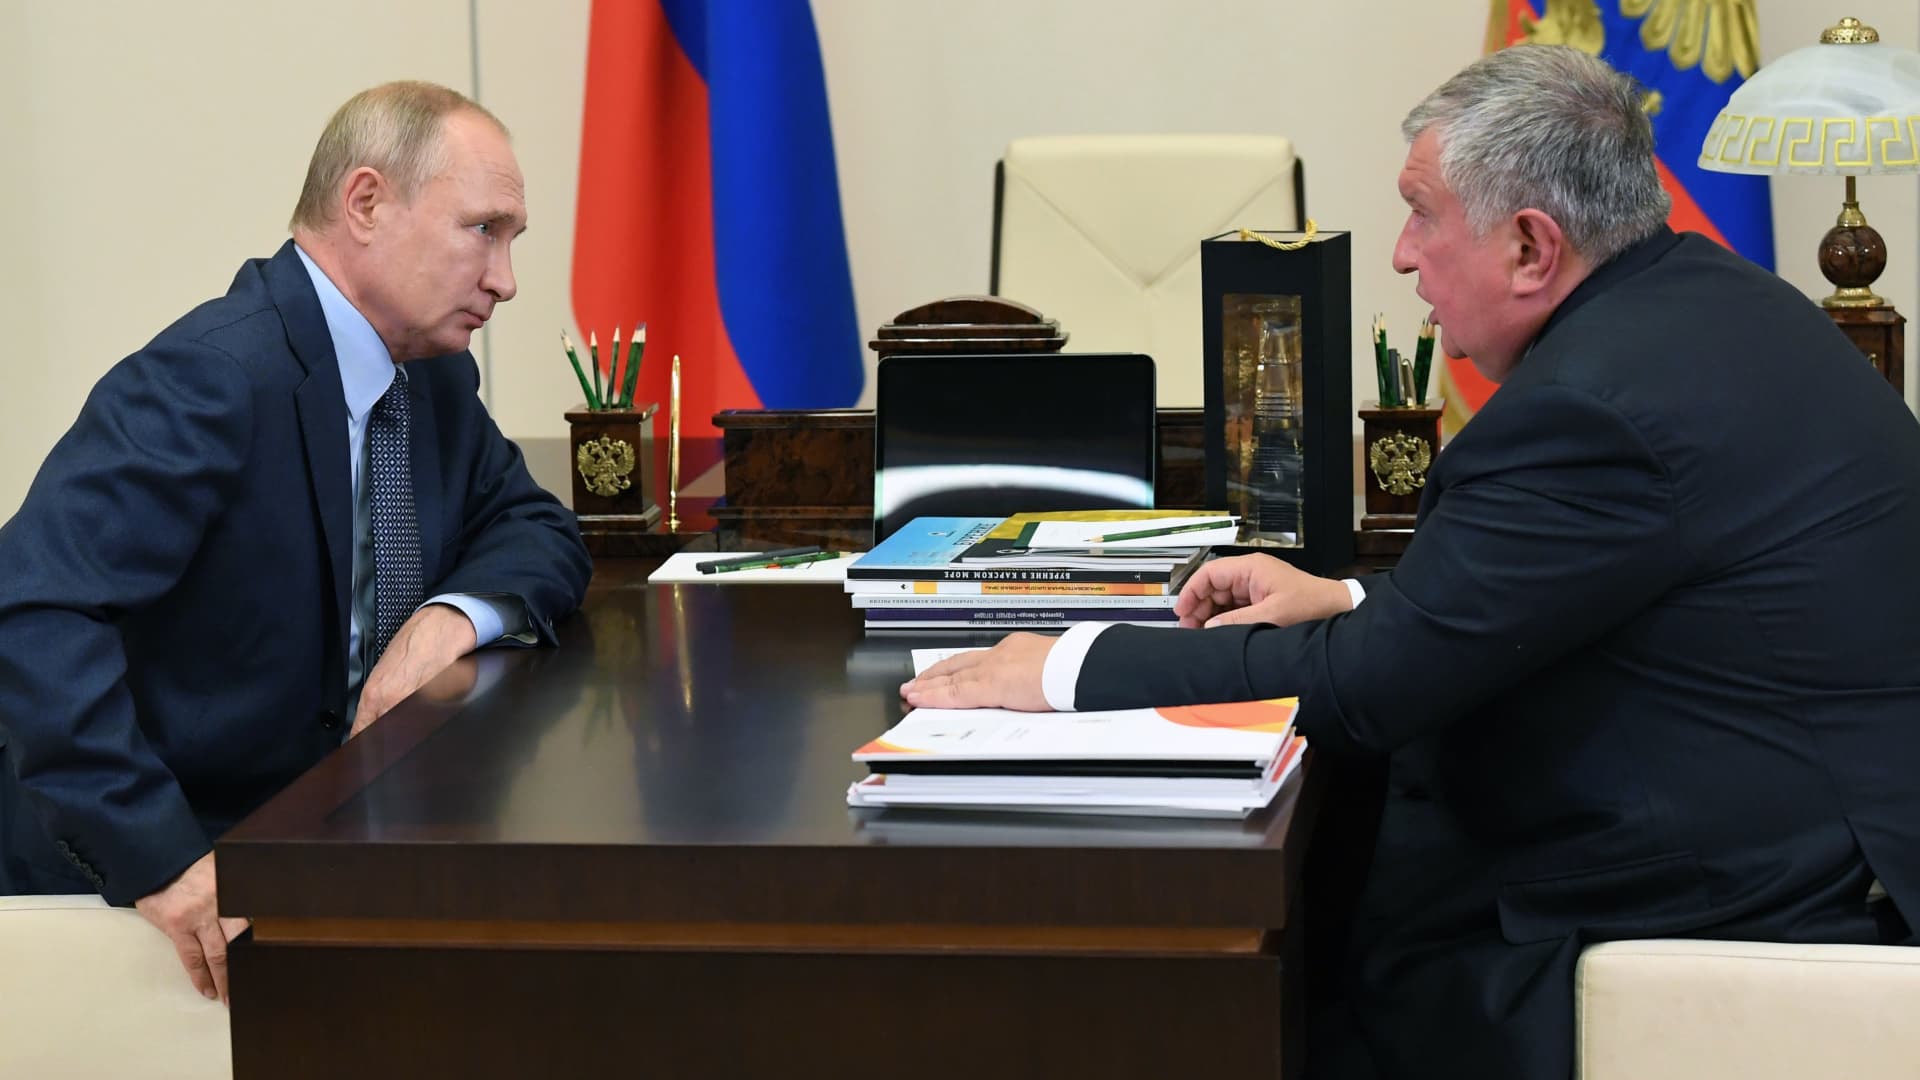 Russian President Vladimir Putin meets with Russia's oil giant Rosneft CEO Igor Sechin at the Novo-Ogaryovo state residence outside Moscow on August 18, 2020.